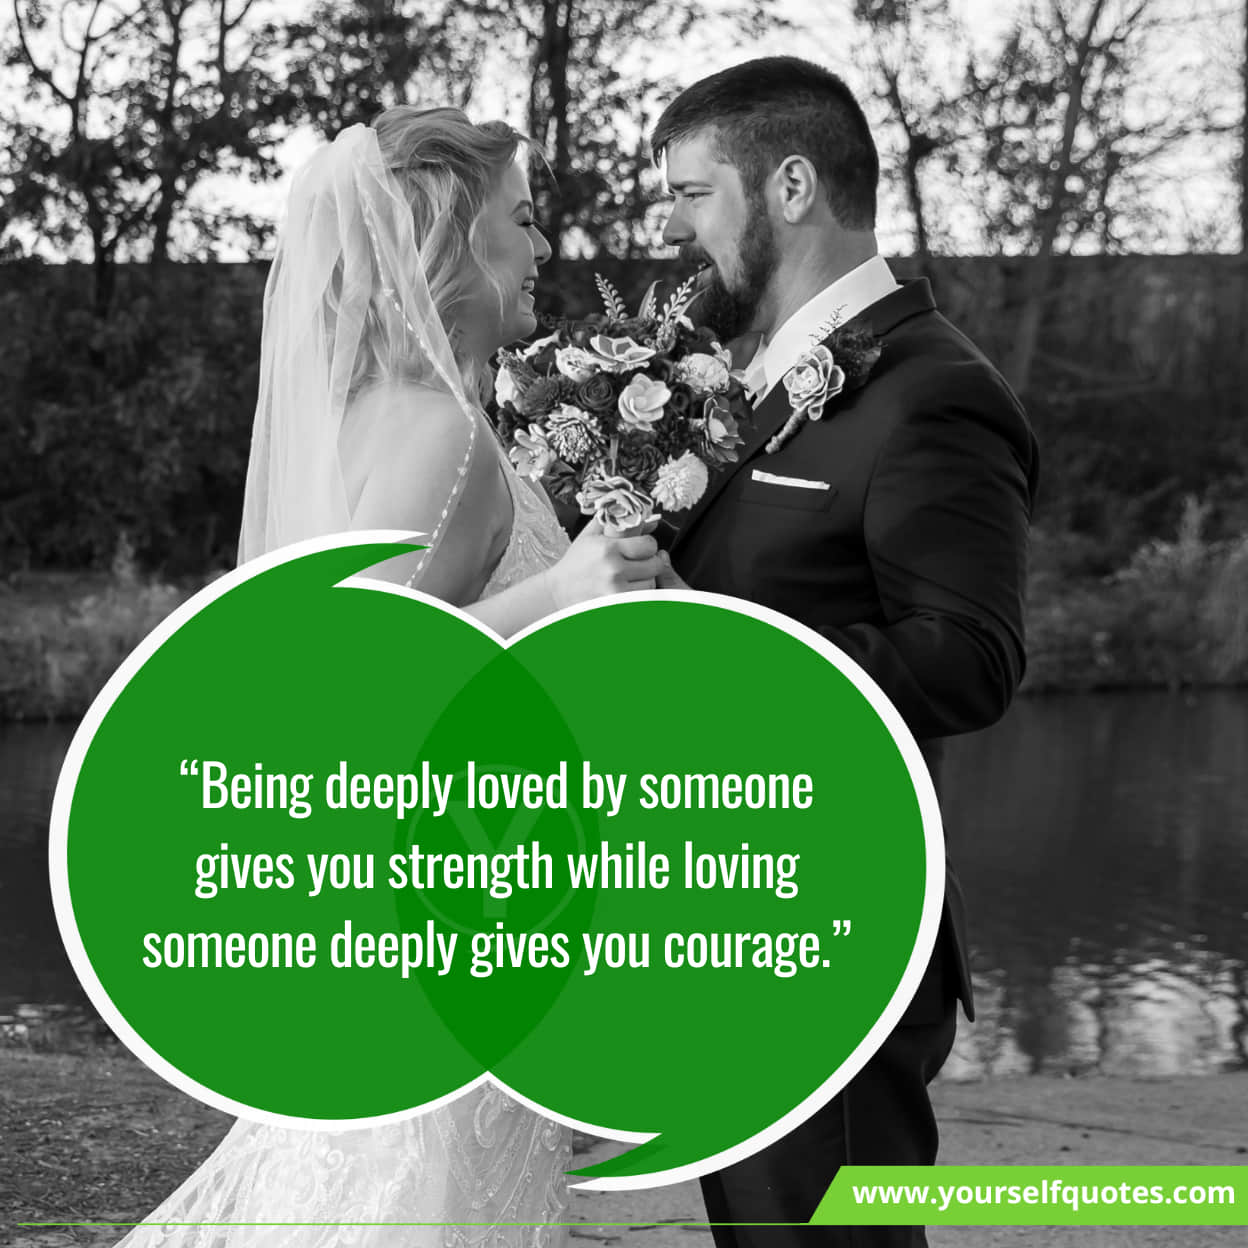 Inspiring Wedding Quotes for Cards